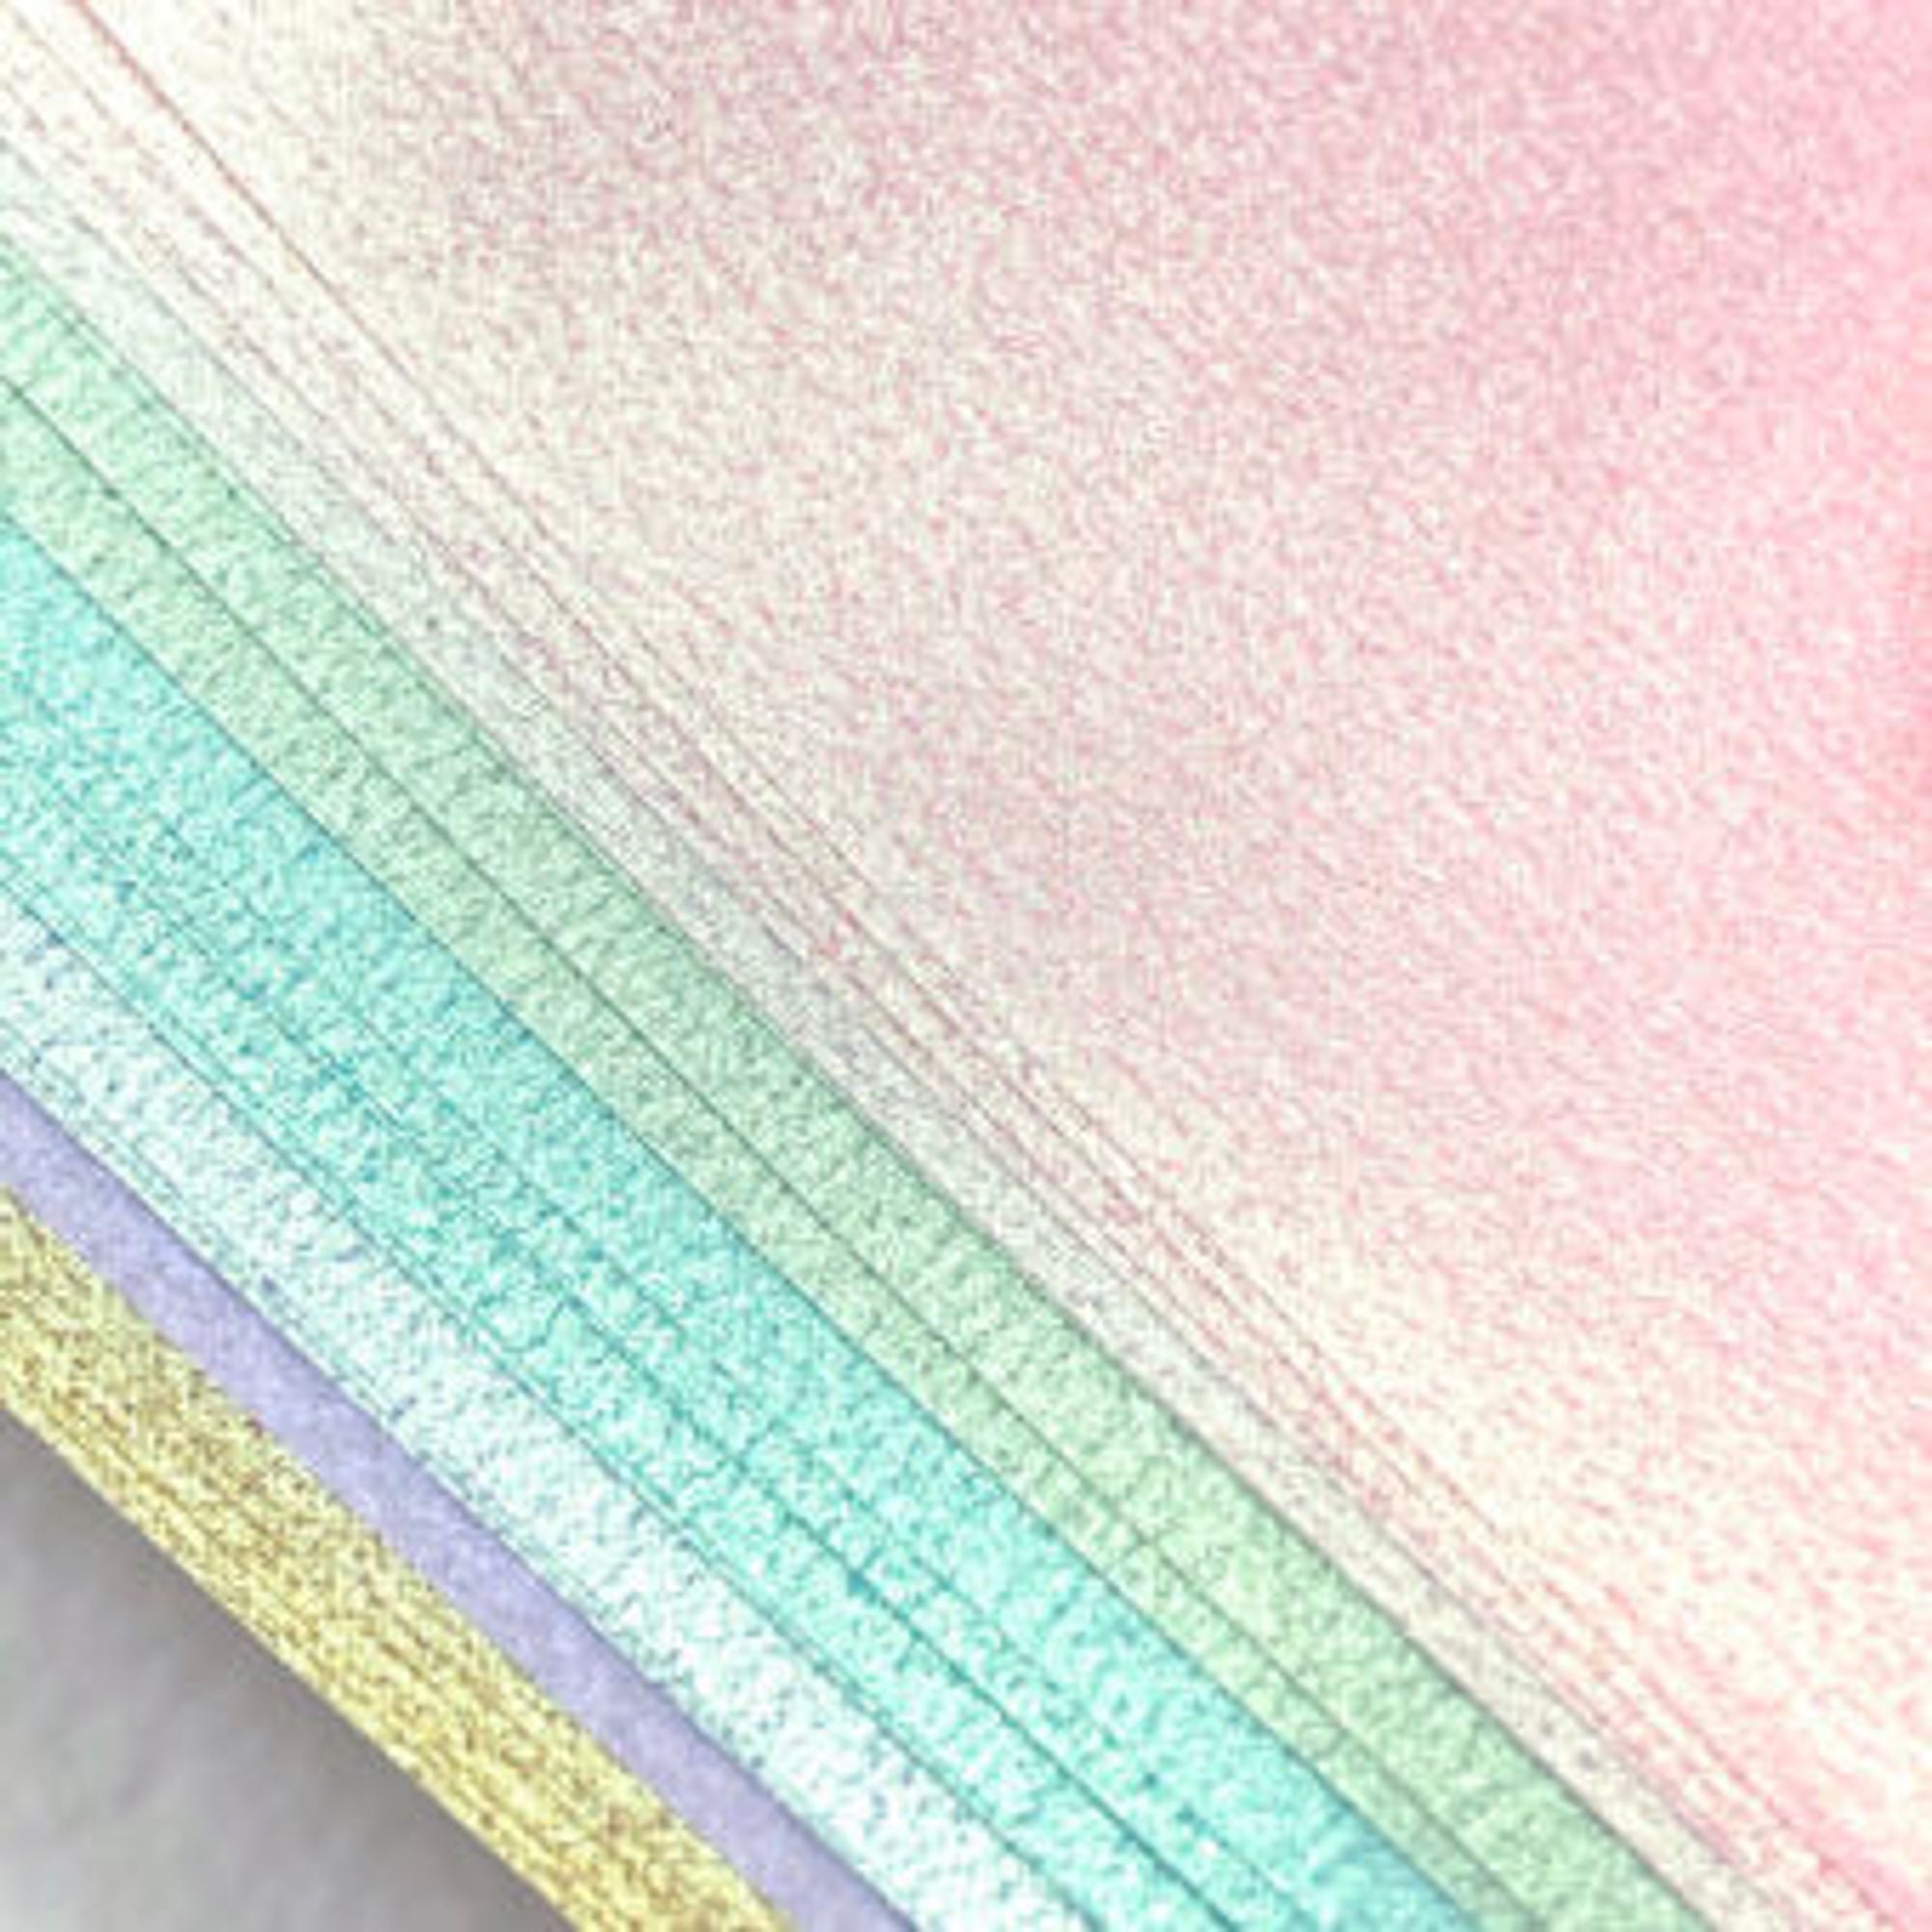 Shimmer Vellum 6x6 - Spring Assortment - 10 Sheets(2 each of 5 colors)